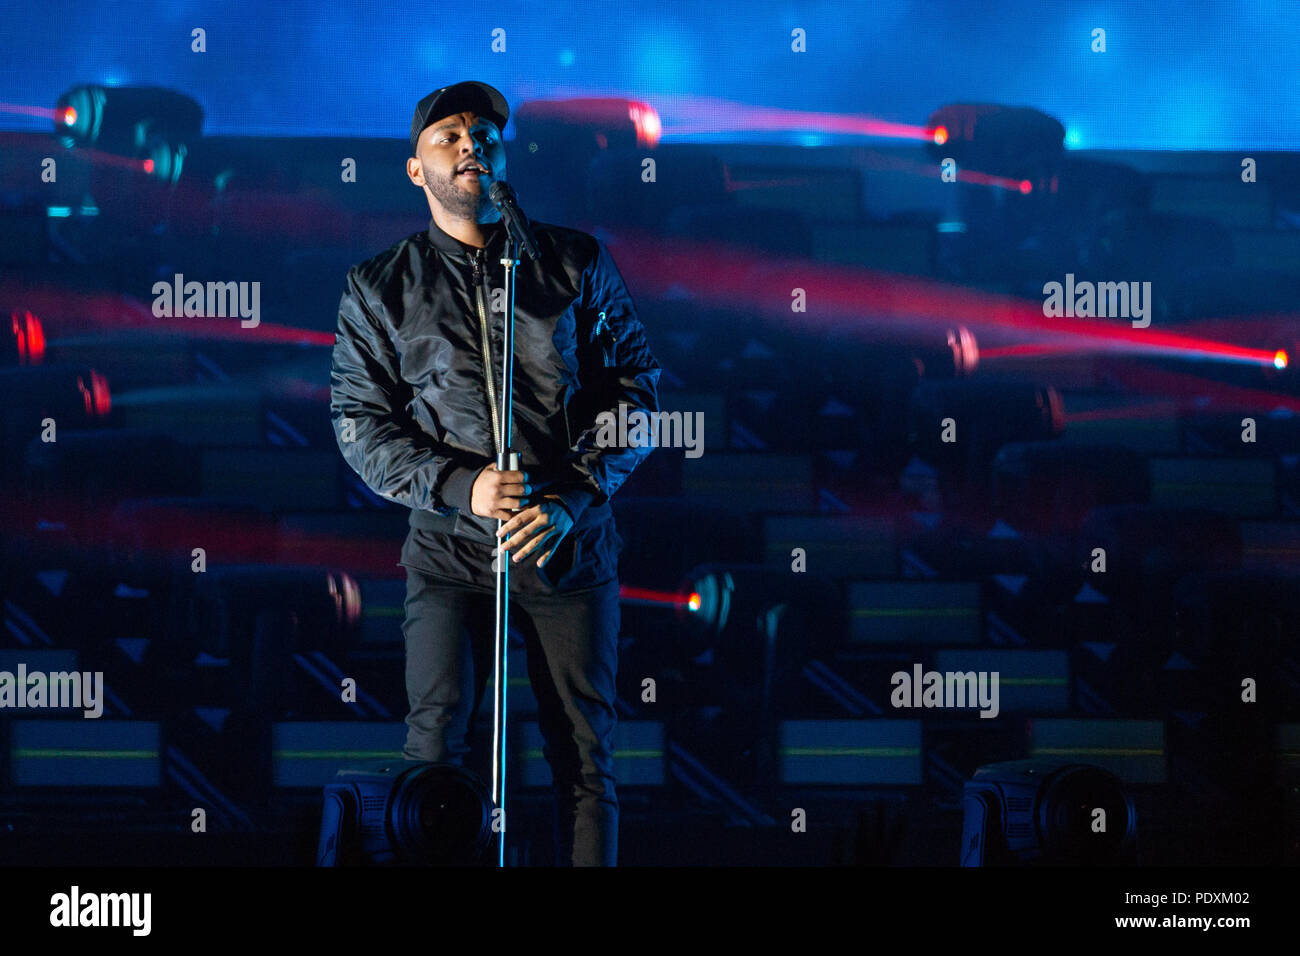 San Francisco, California, USA. 10th Aug, 2018. THE WEEKND (ABEL TESFAYE) during Outside Lands Music Festival at Golden Gate Park in San Francisco, California Credit: Daniel DeSlover/ZUMA Wire/Alamy Live News Stock Photo